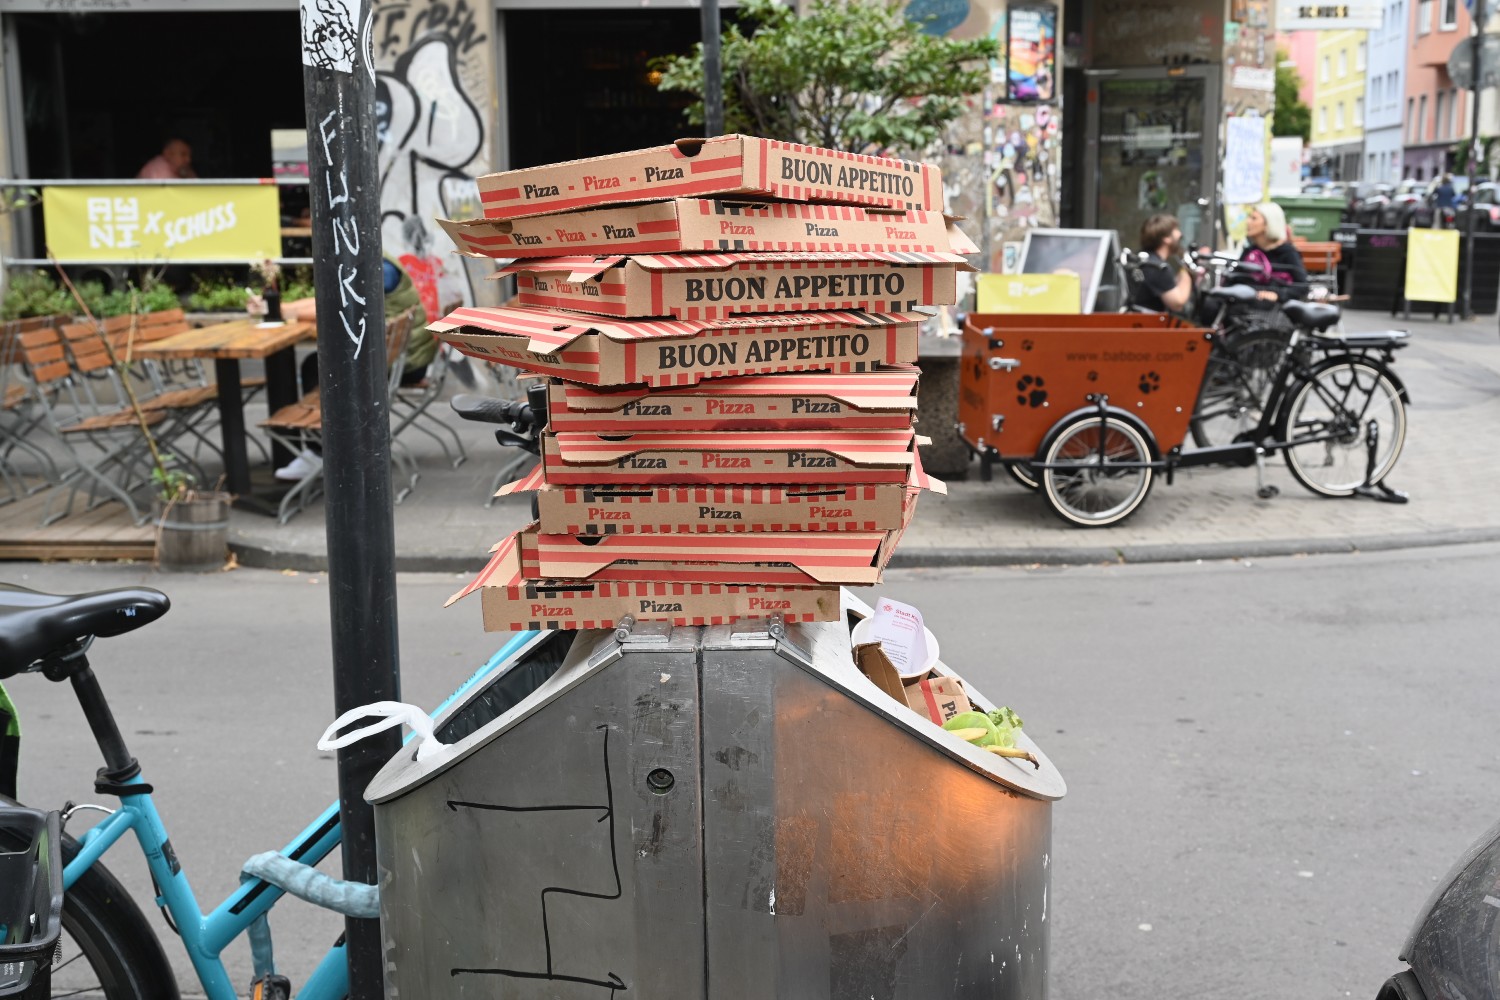 New York City Just Got Its First Pizza Box Recycling Container